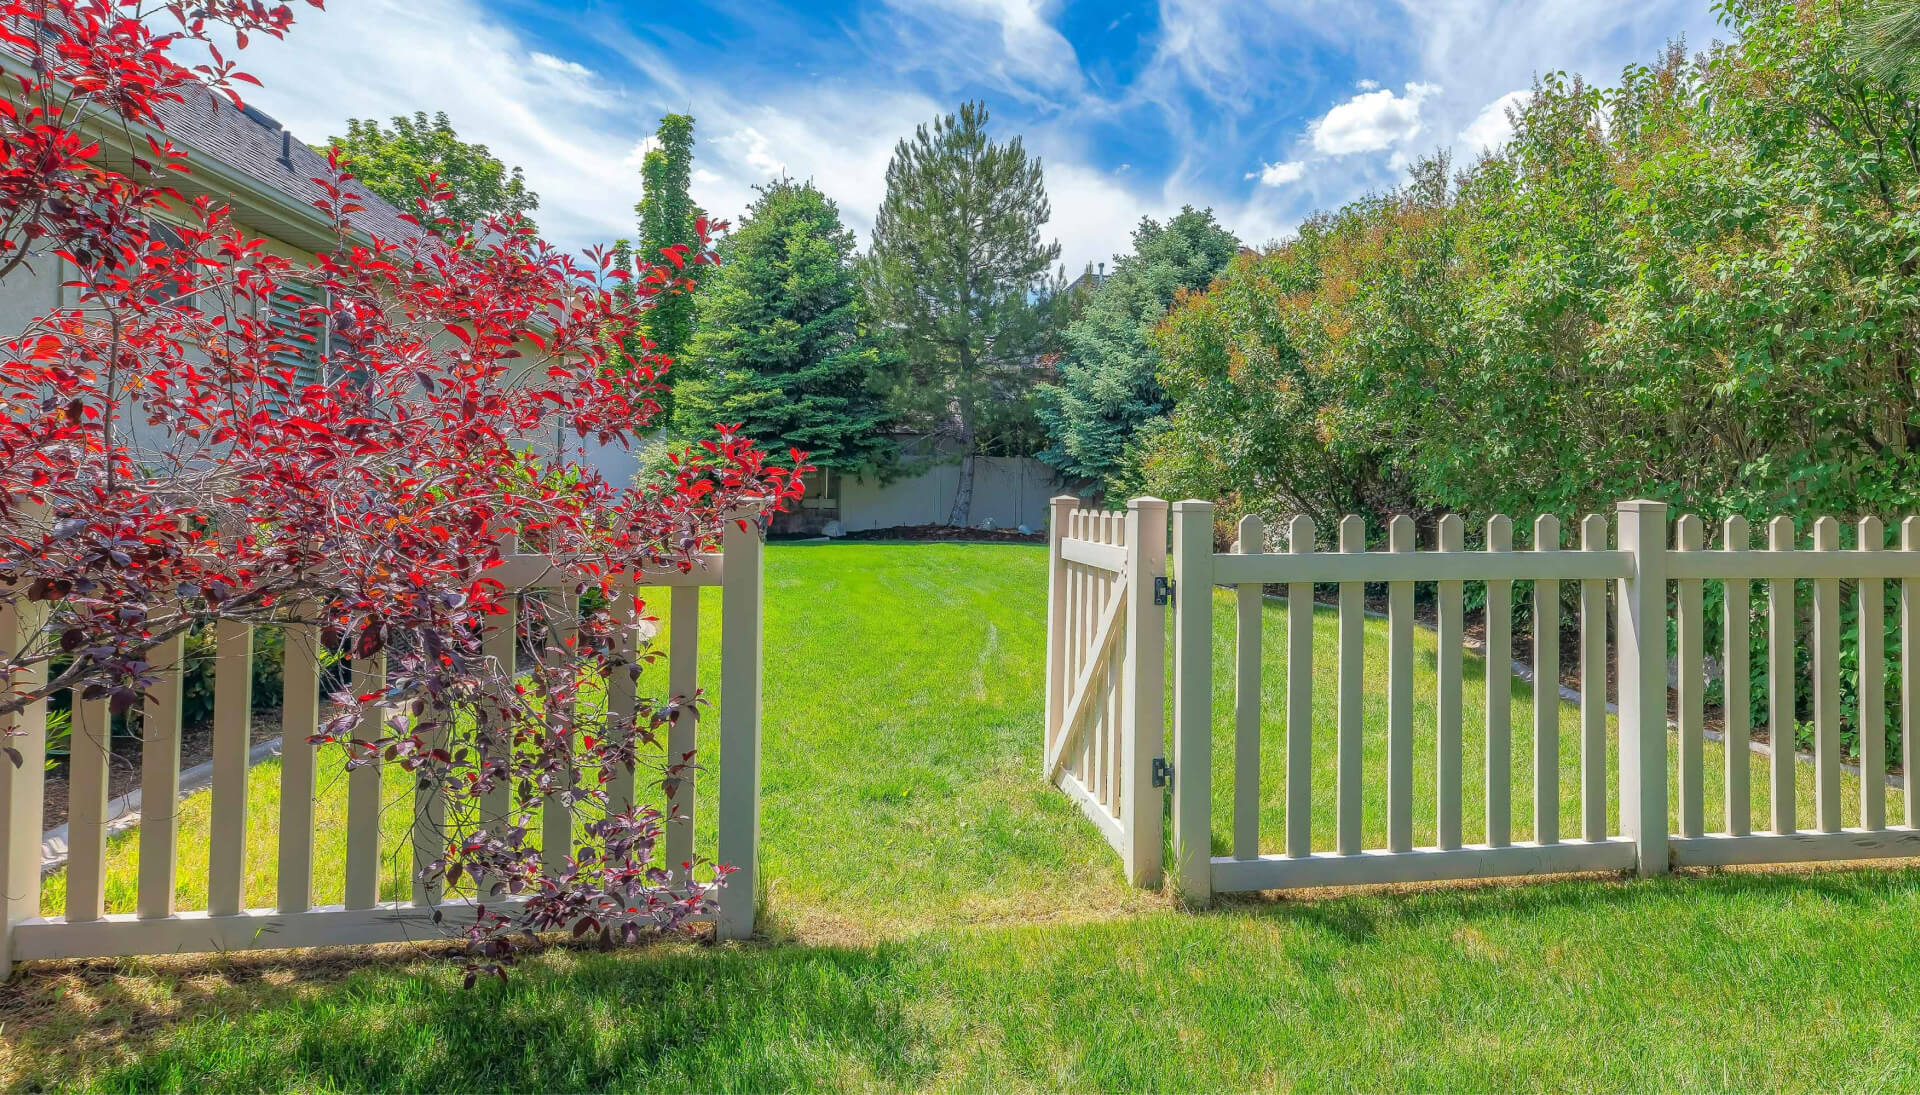 A functional fence gate providing access to a well-maintained backyard, surrounded by a wooden fence in Champaign